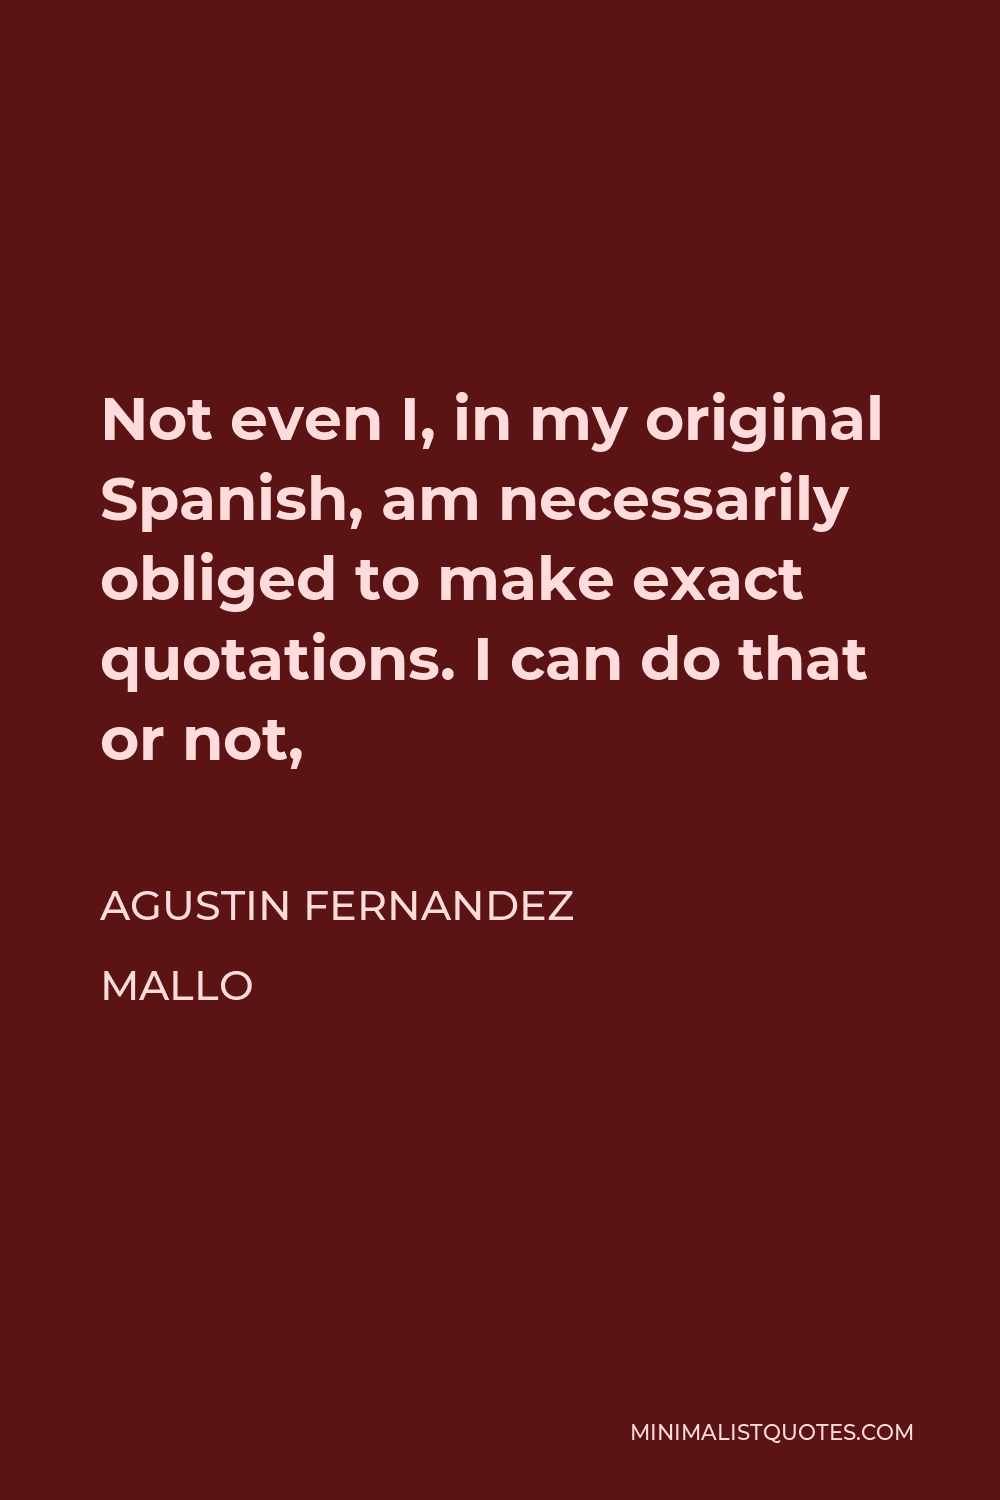 Agustin Fernandez Mallo Quote - Not even I, in my original Spanish, am necessarily obliged to make exact quotations. I can do that or not,